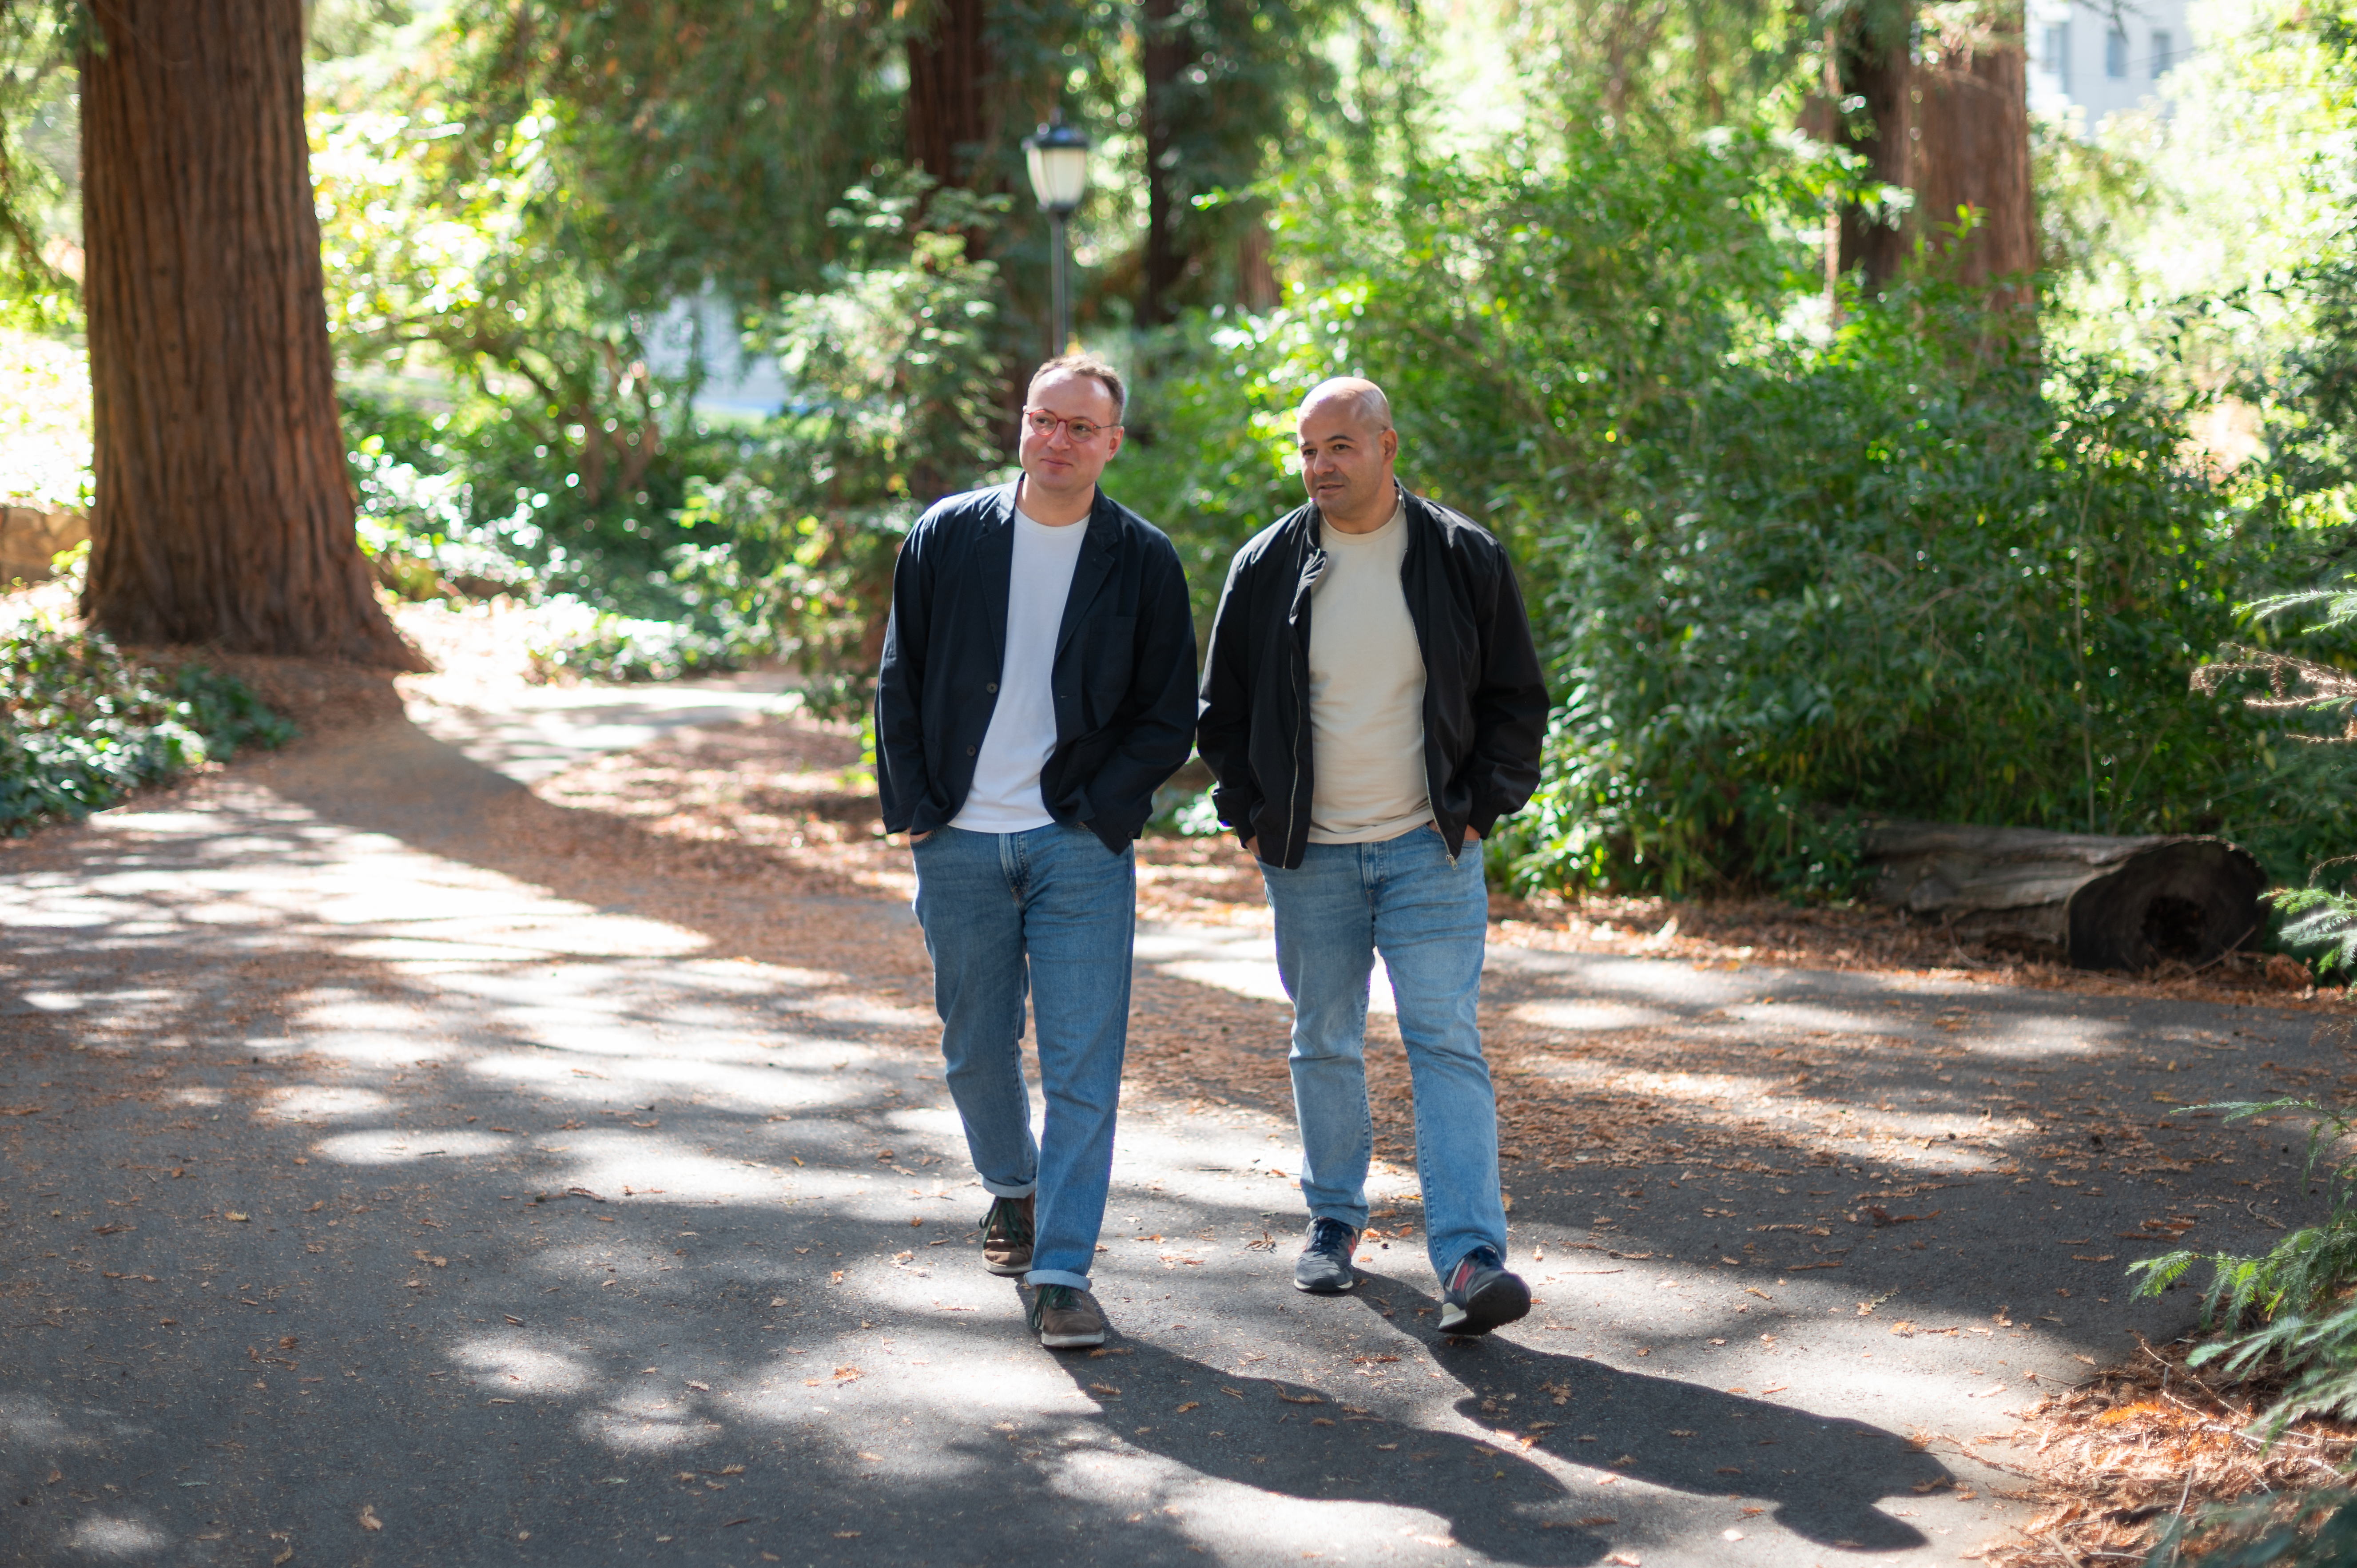 two men walking together in a forest background